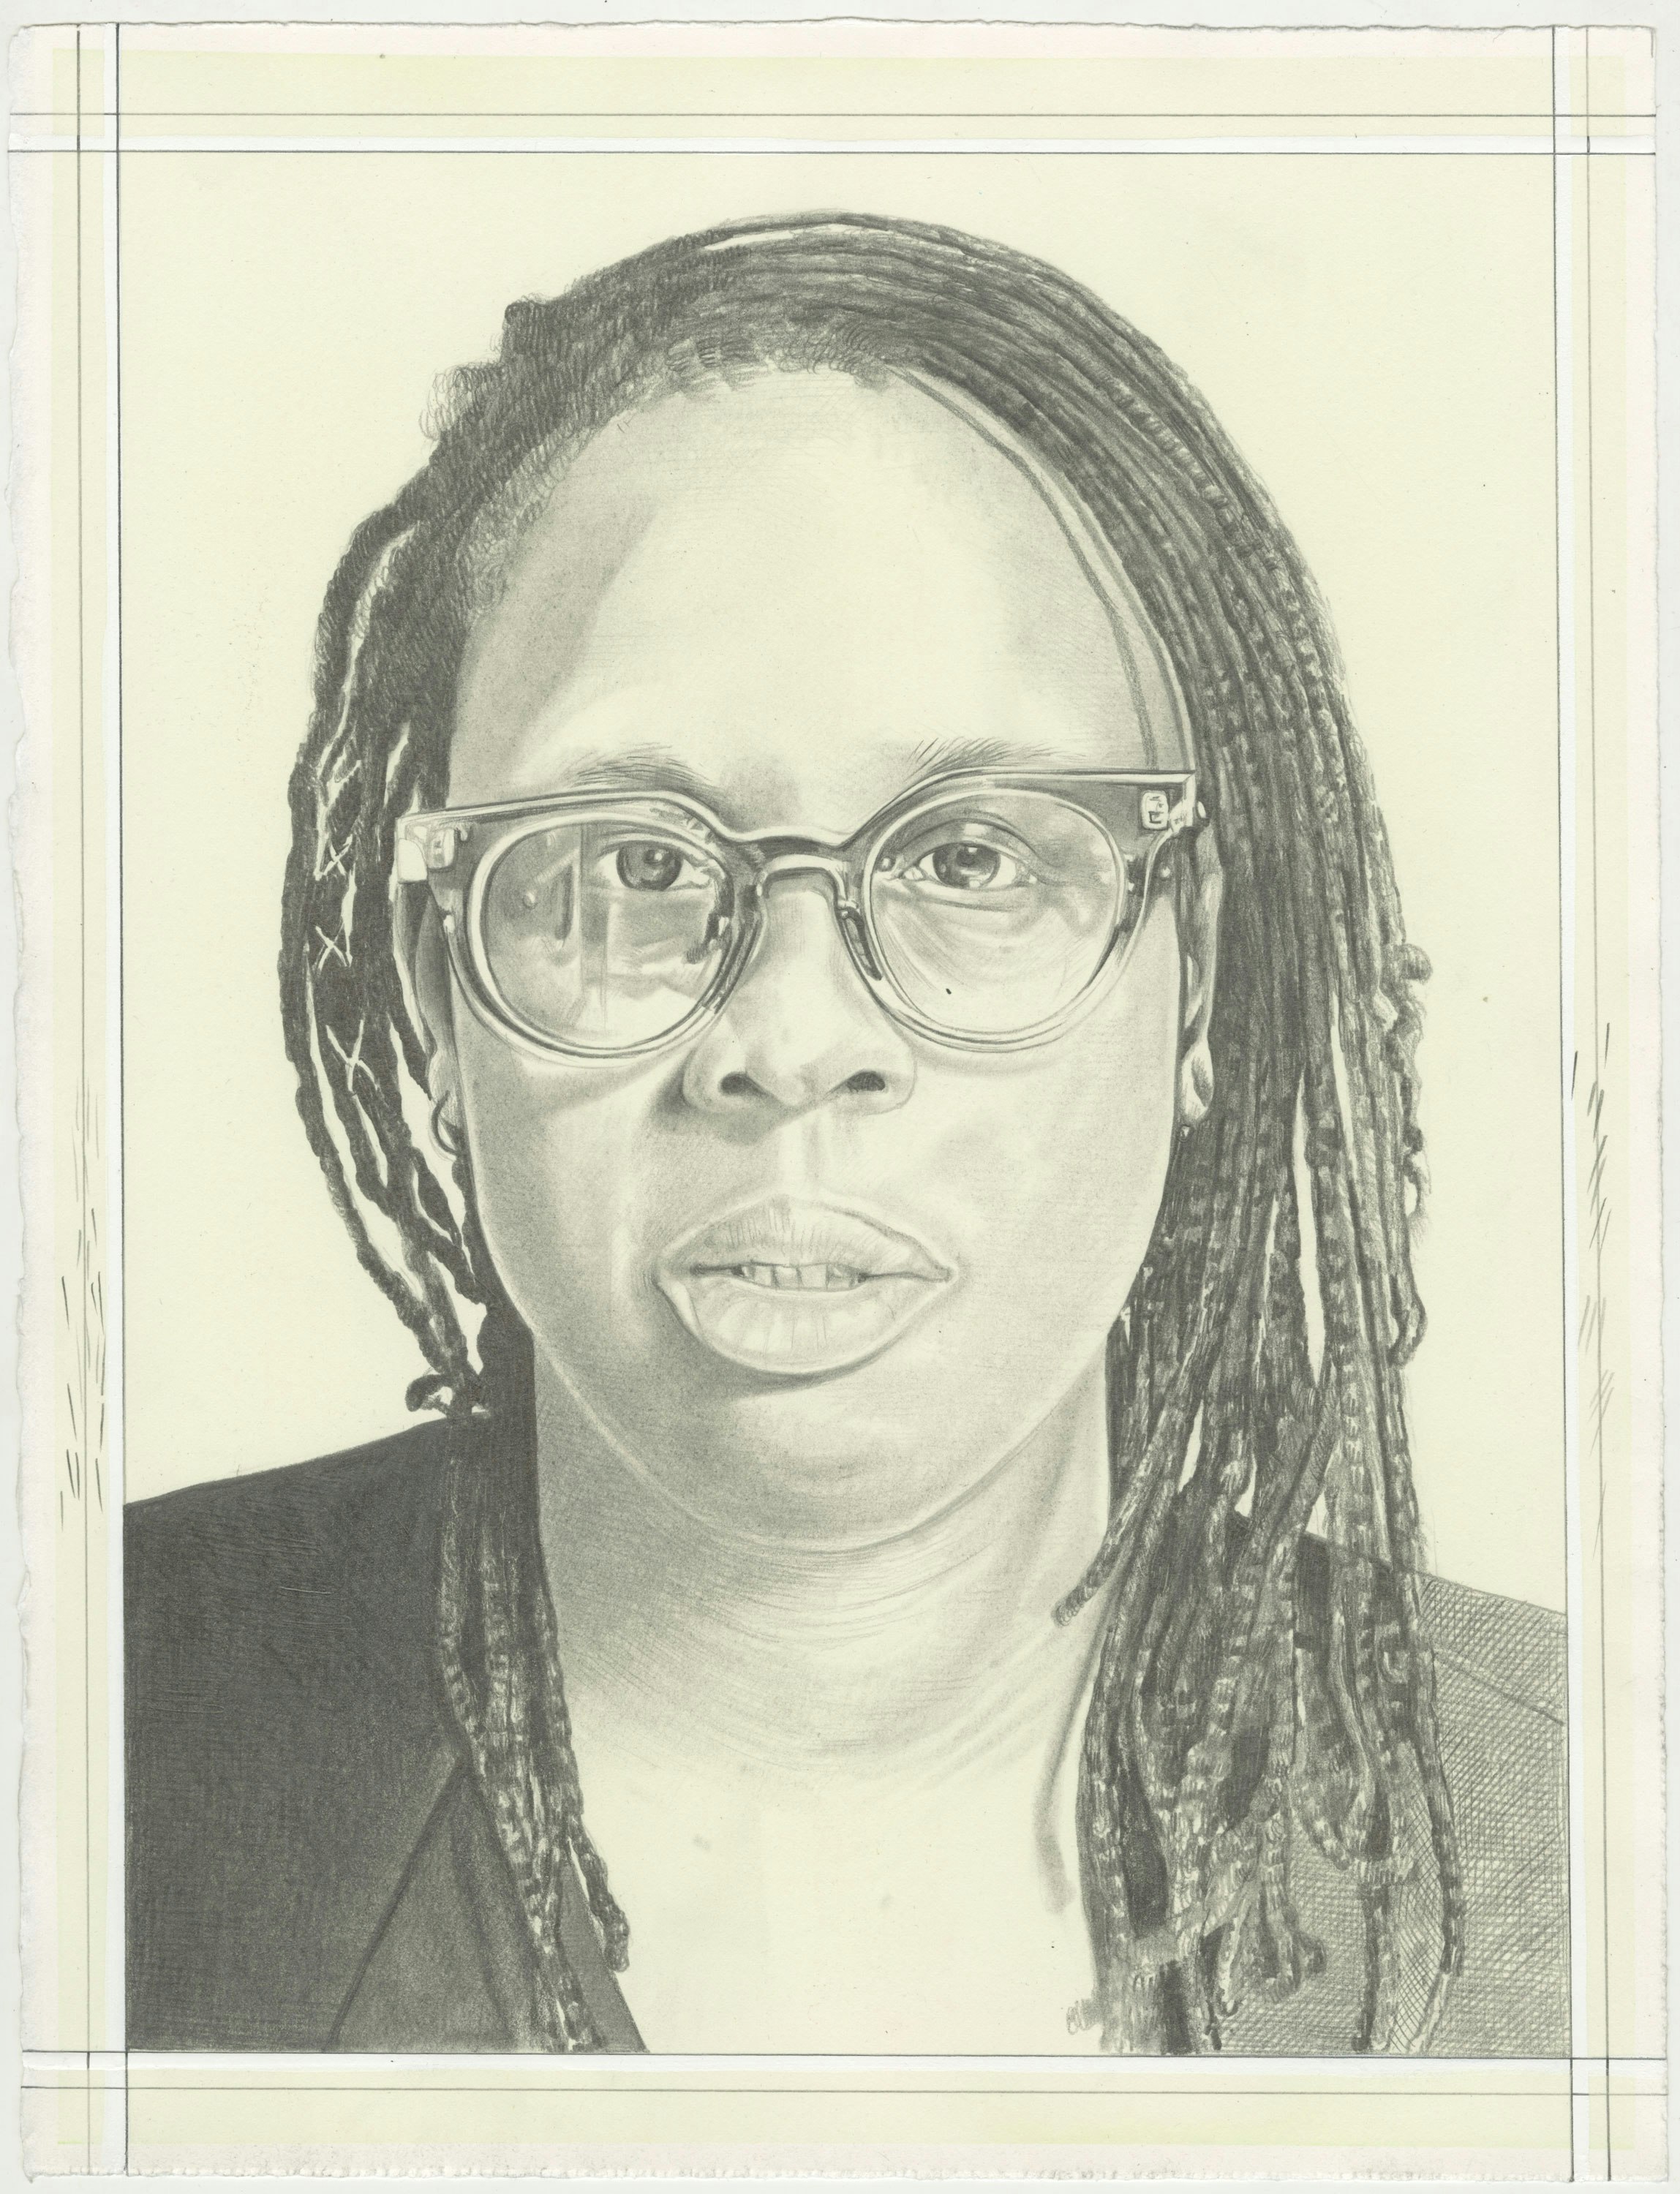 Portrait of Mickalene Thomas, pencil on paper by Phong H. Bui. Photo: Andrew Mangum